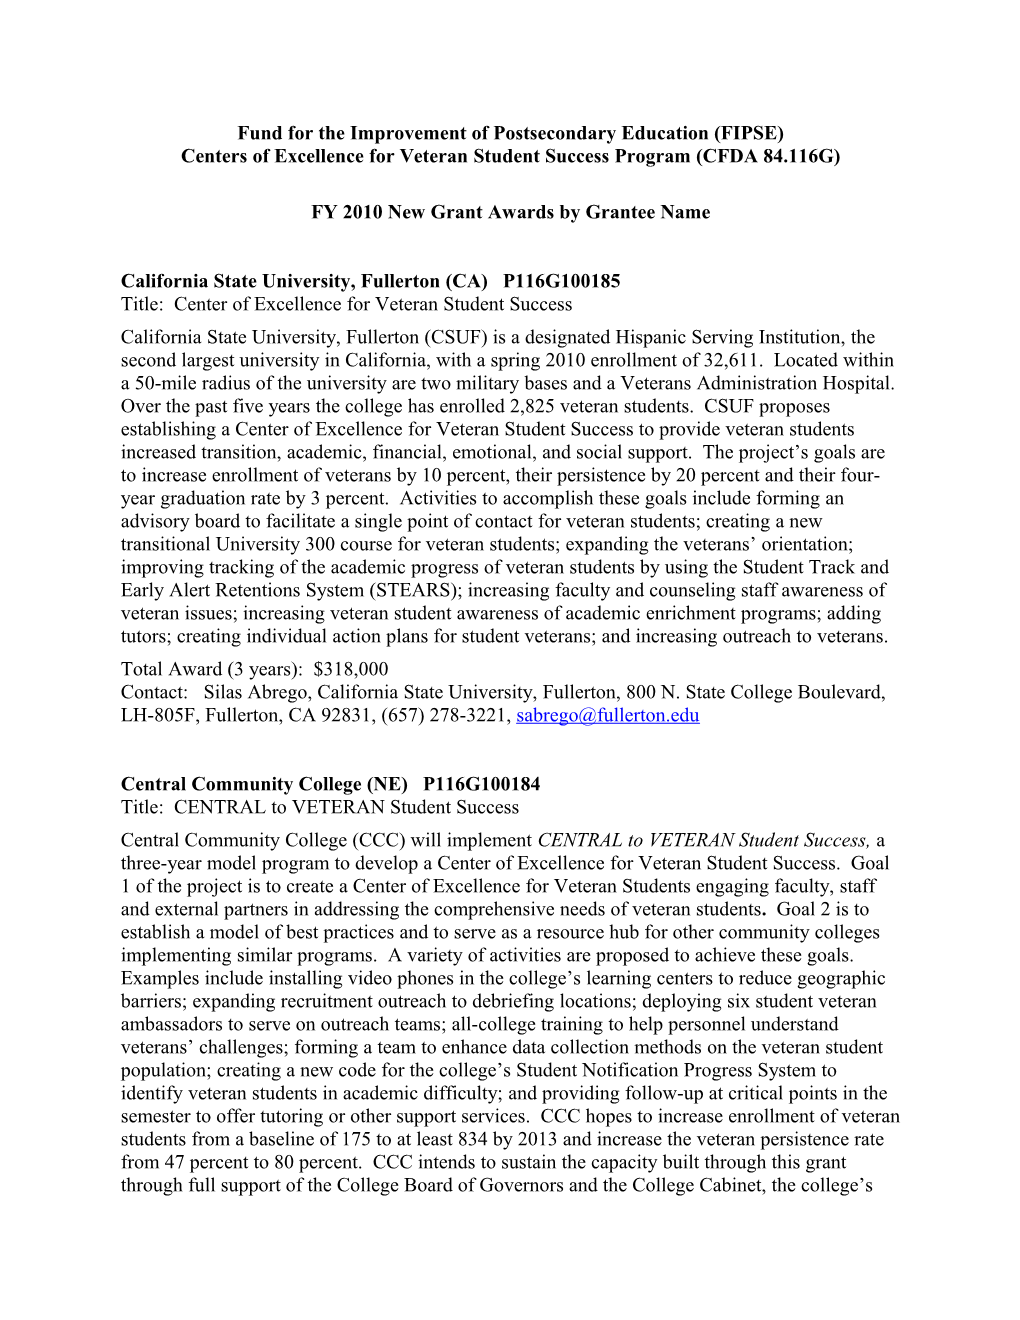 FY 2010 Project Abstracts for the Centers of Excellence for Veteran Student Success Program